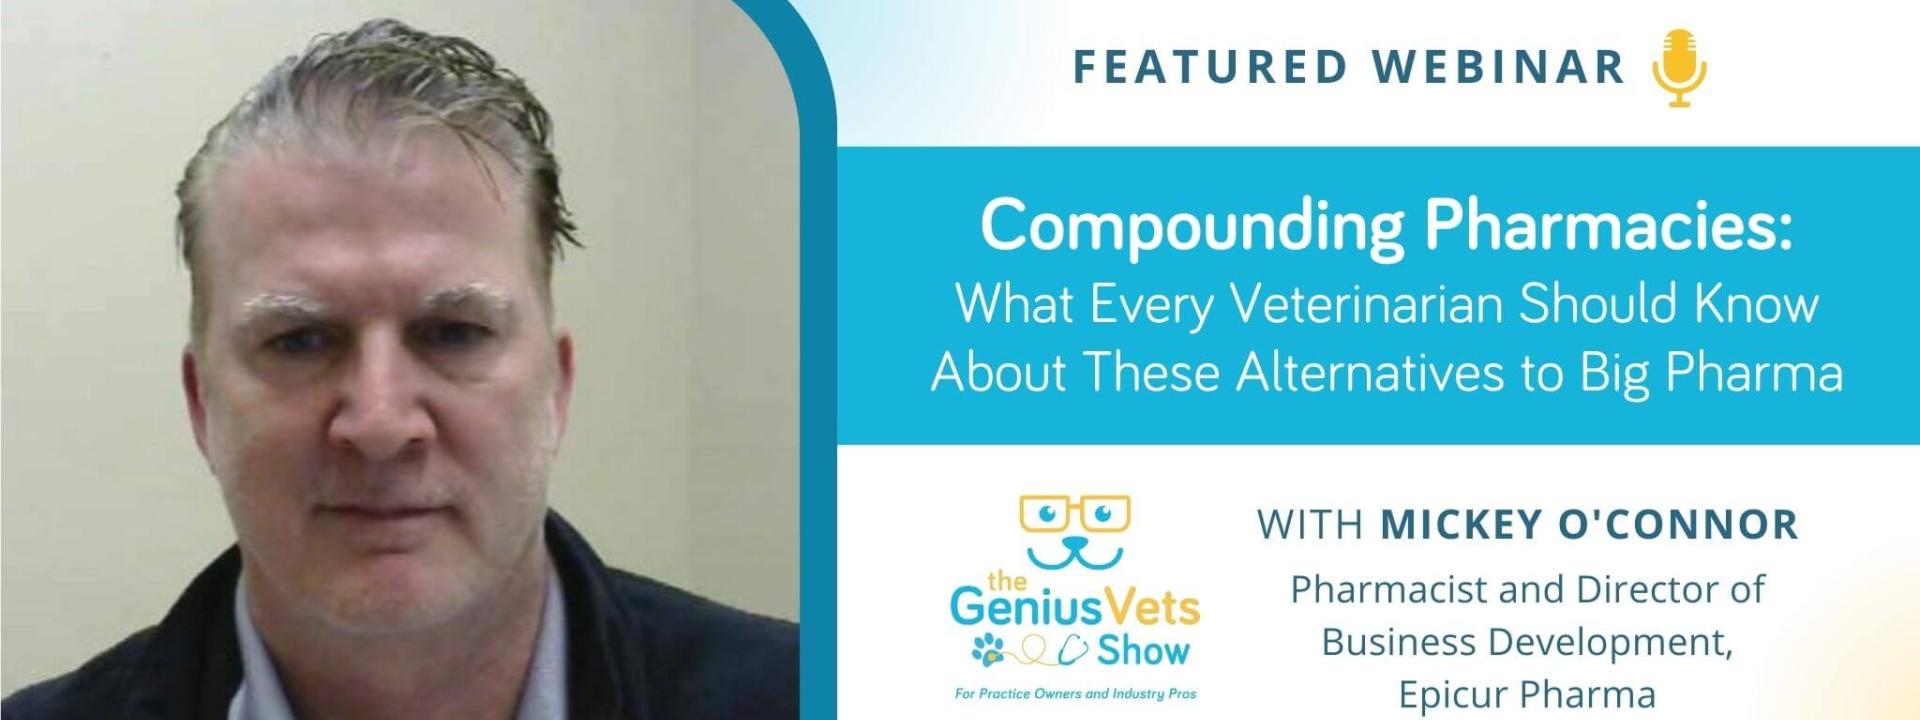 The GeniusVets Show with Mickey O'Connor